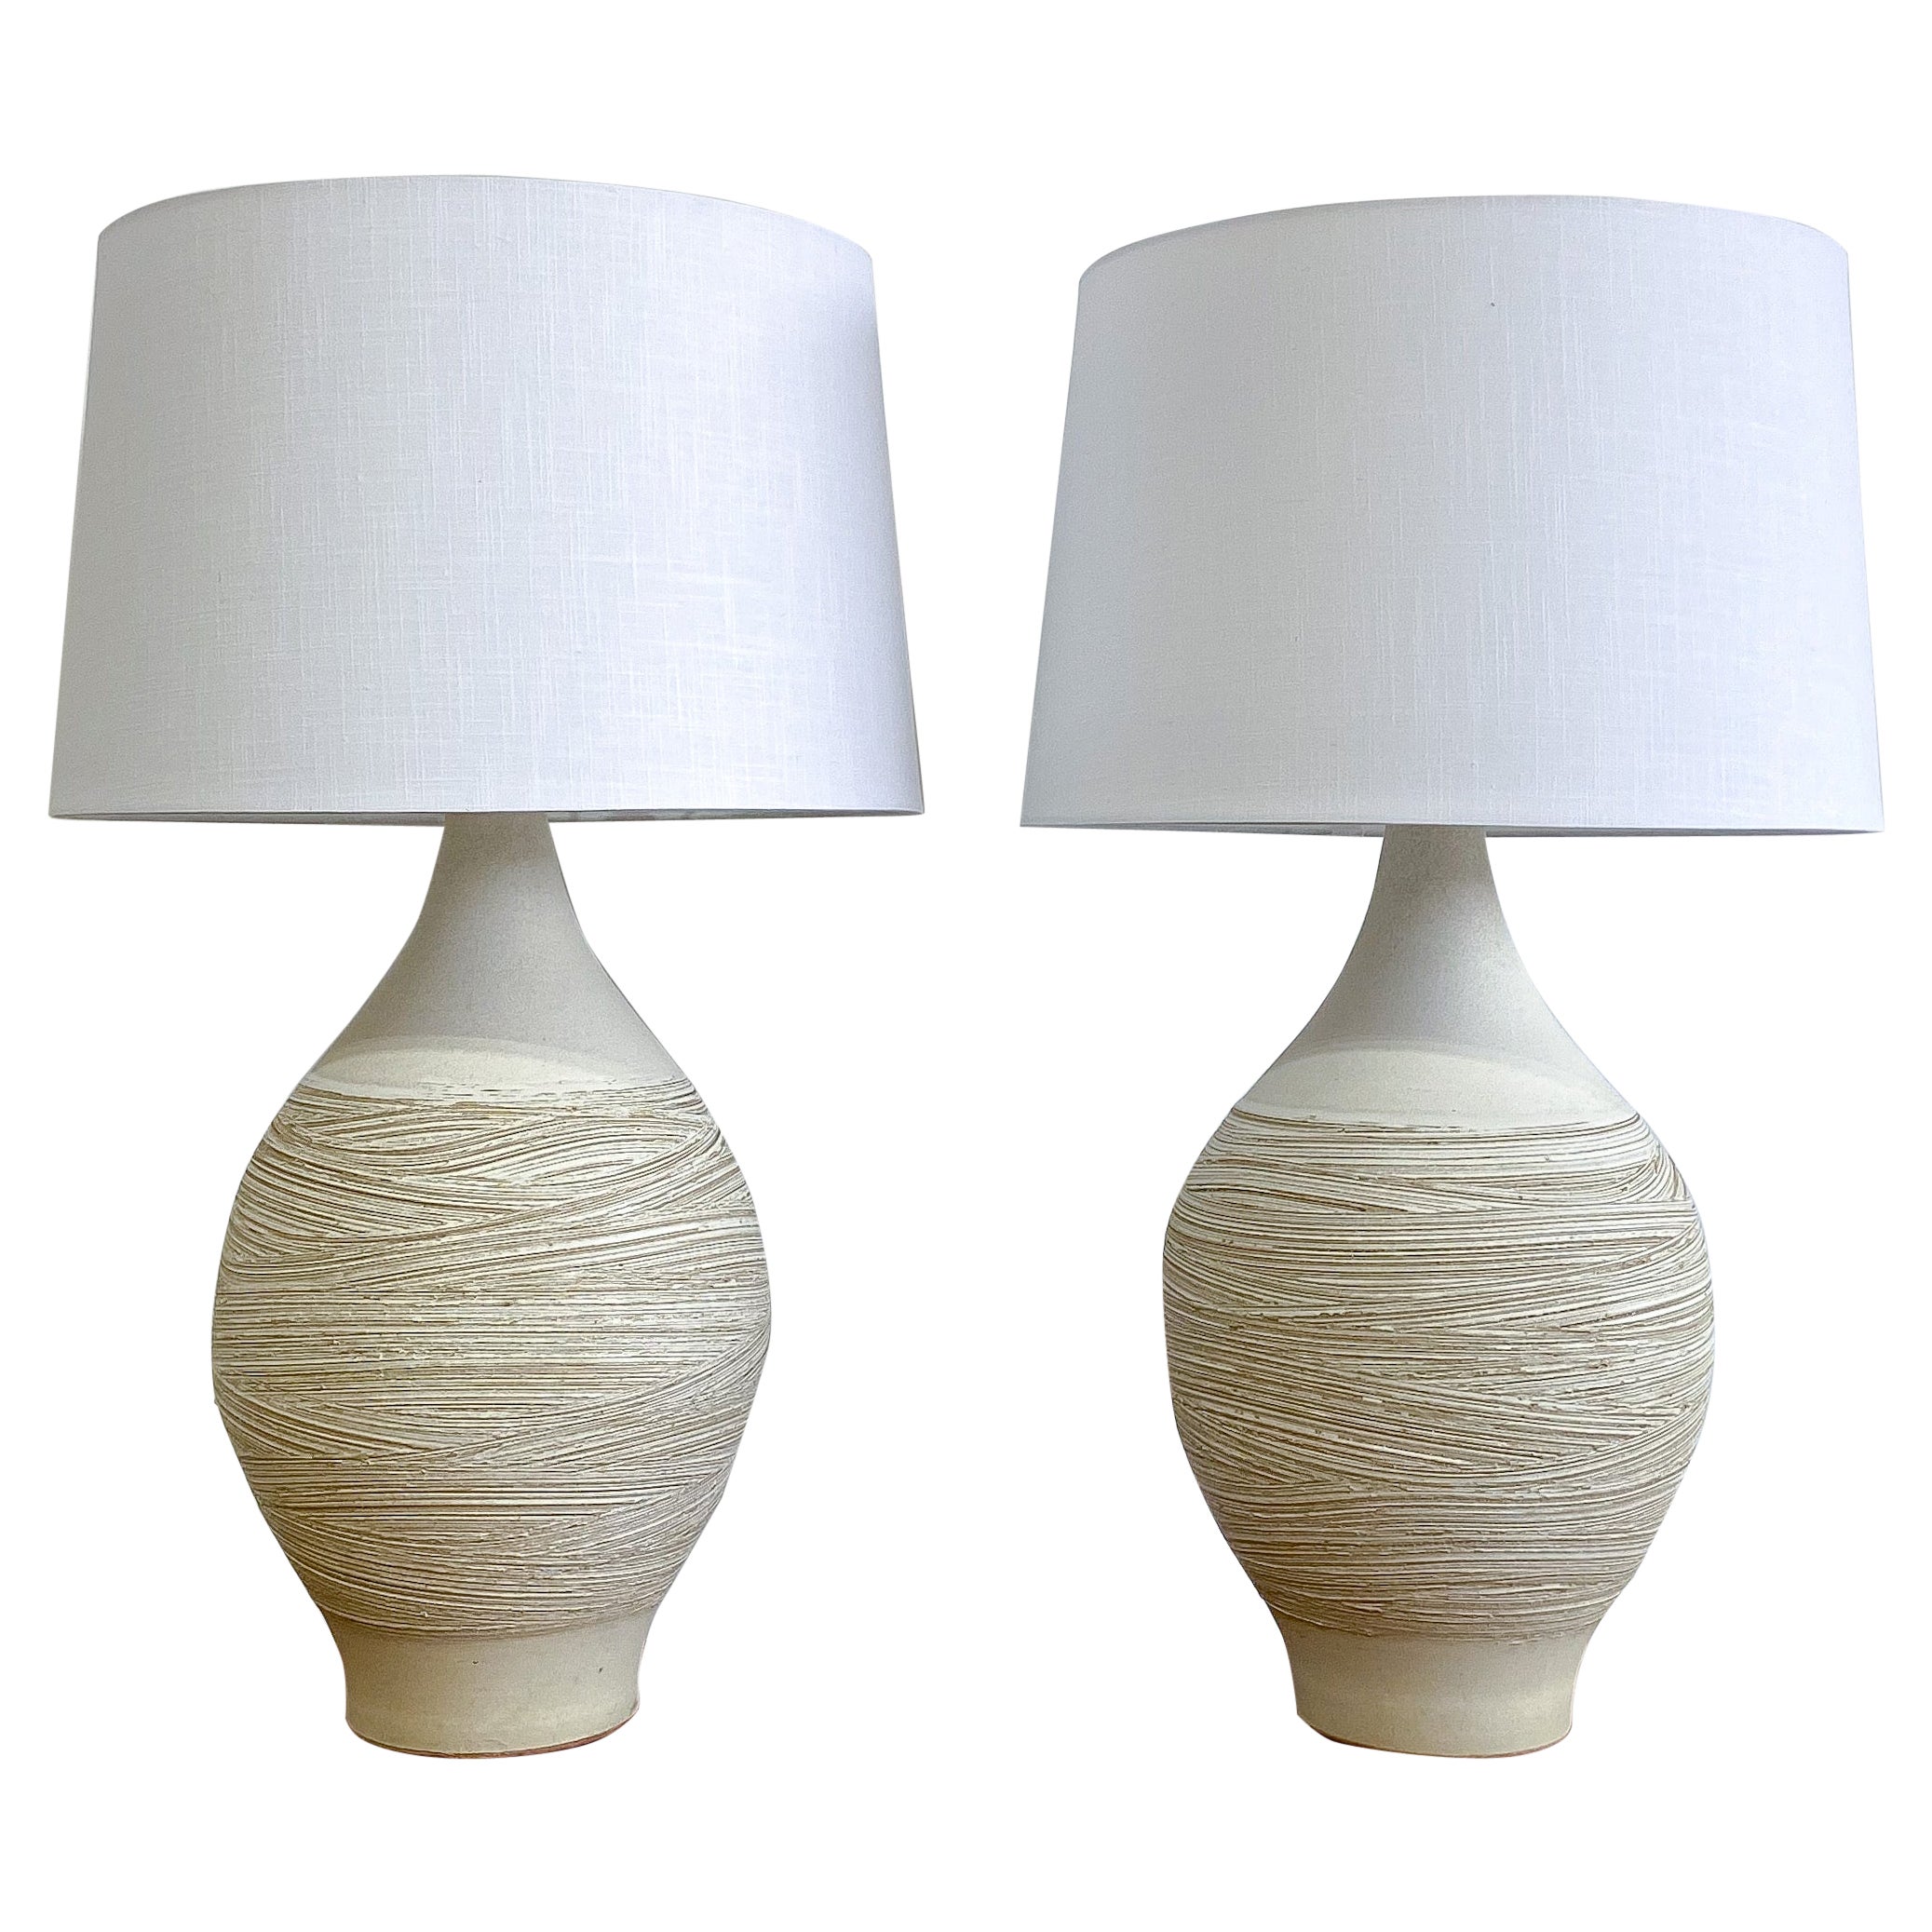 Pair of Ceramic Table Lamps by Lee Rosen for Design Technics, 1960s For Sale